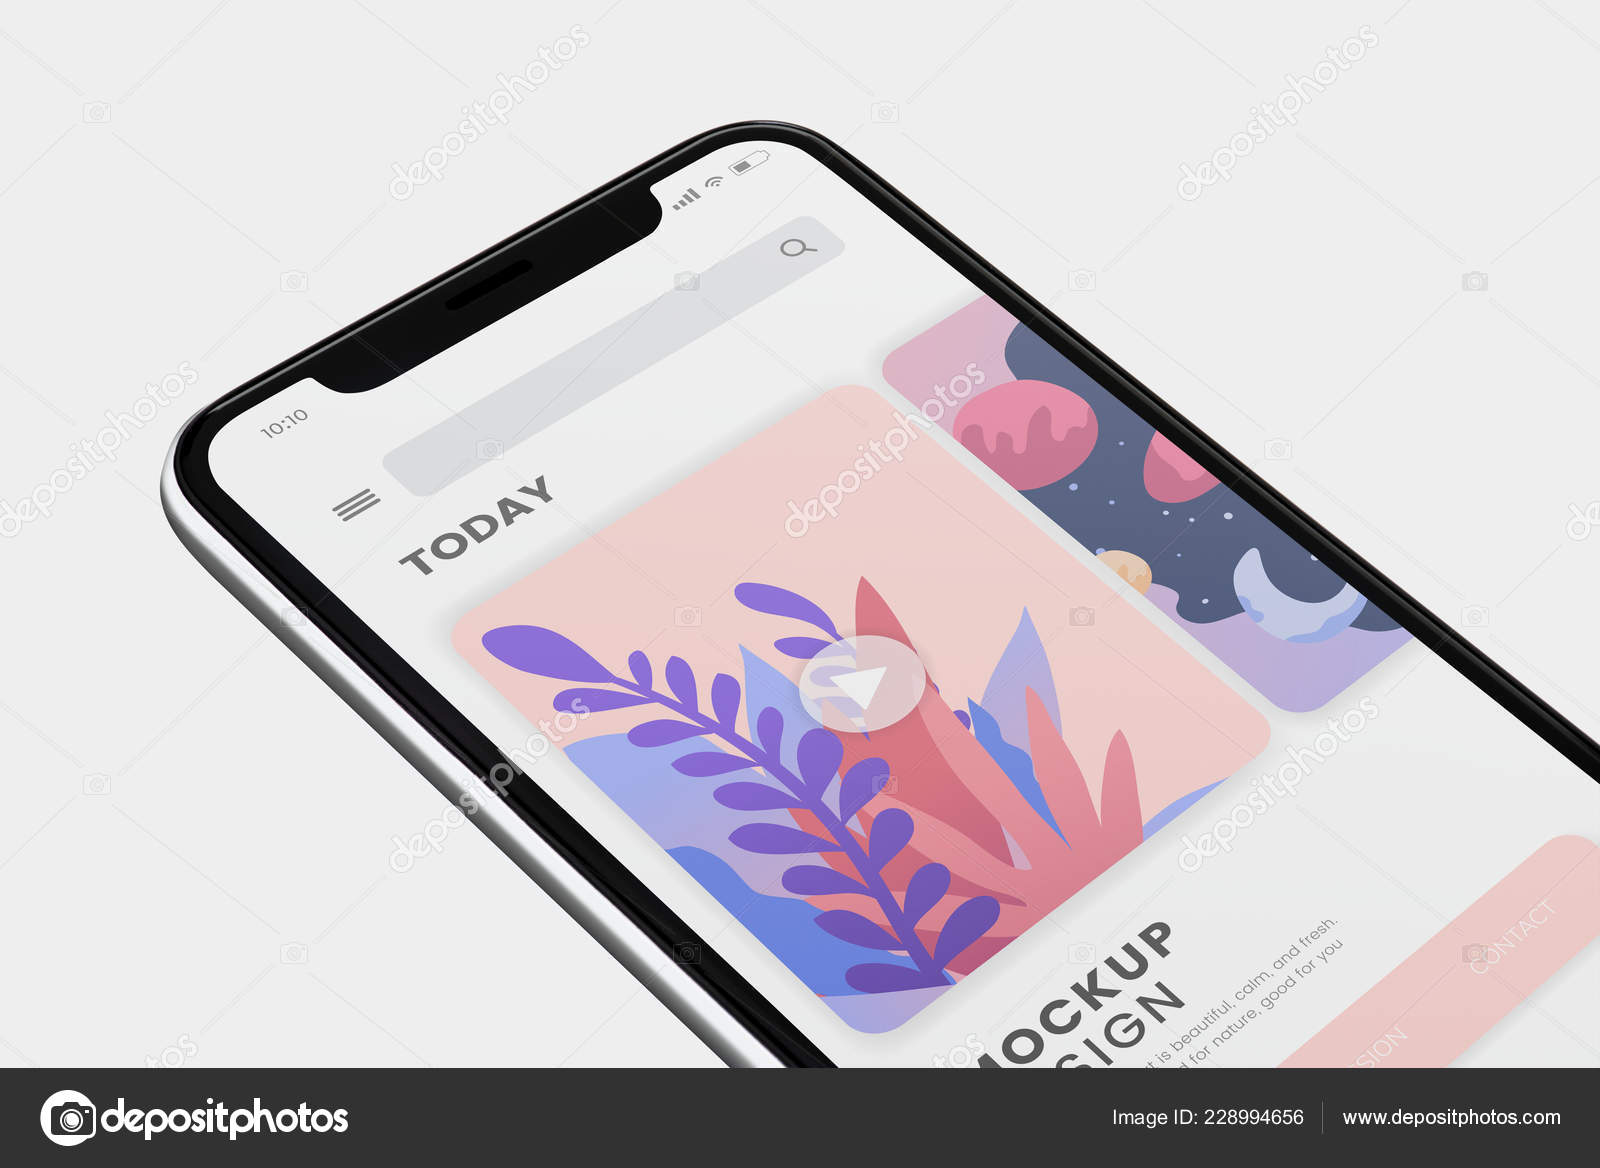 Download Mobile Phone Screen Mockup Design Stock Photo Image By C Rawpixel 228994656